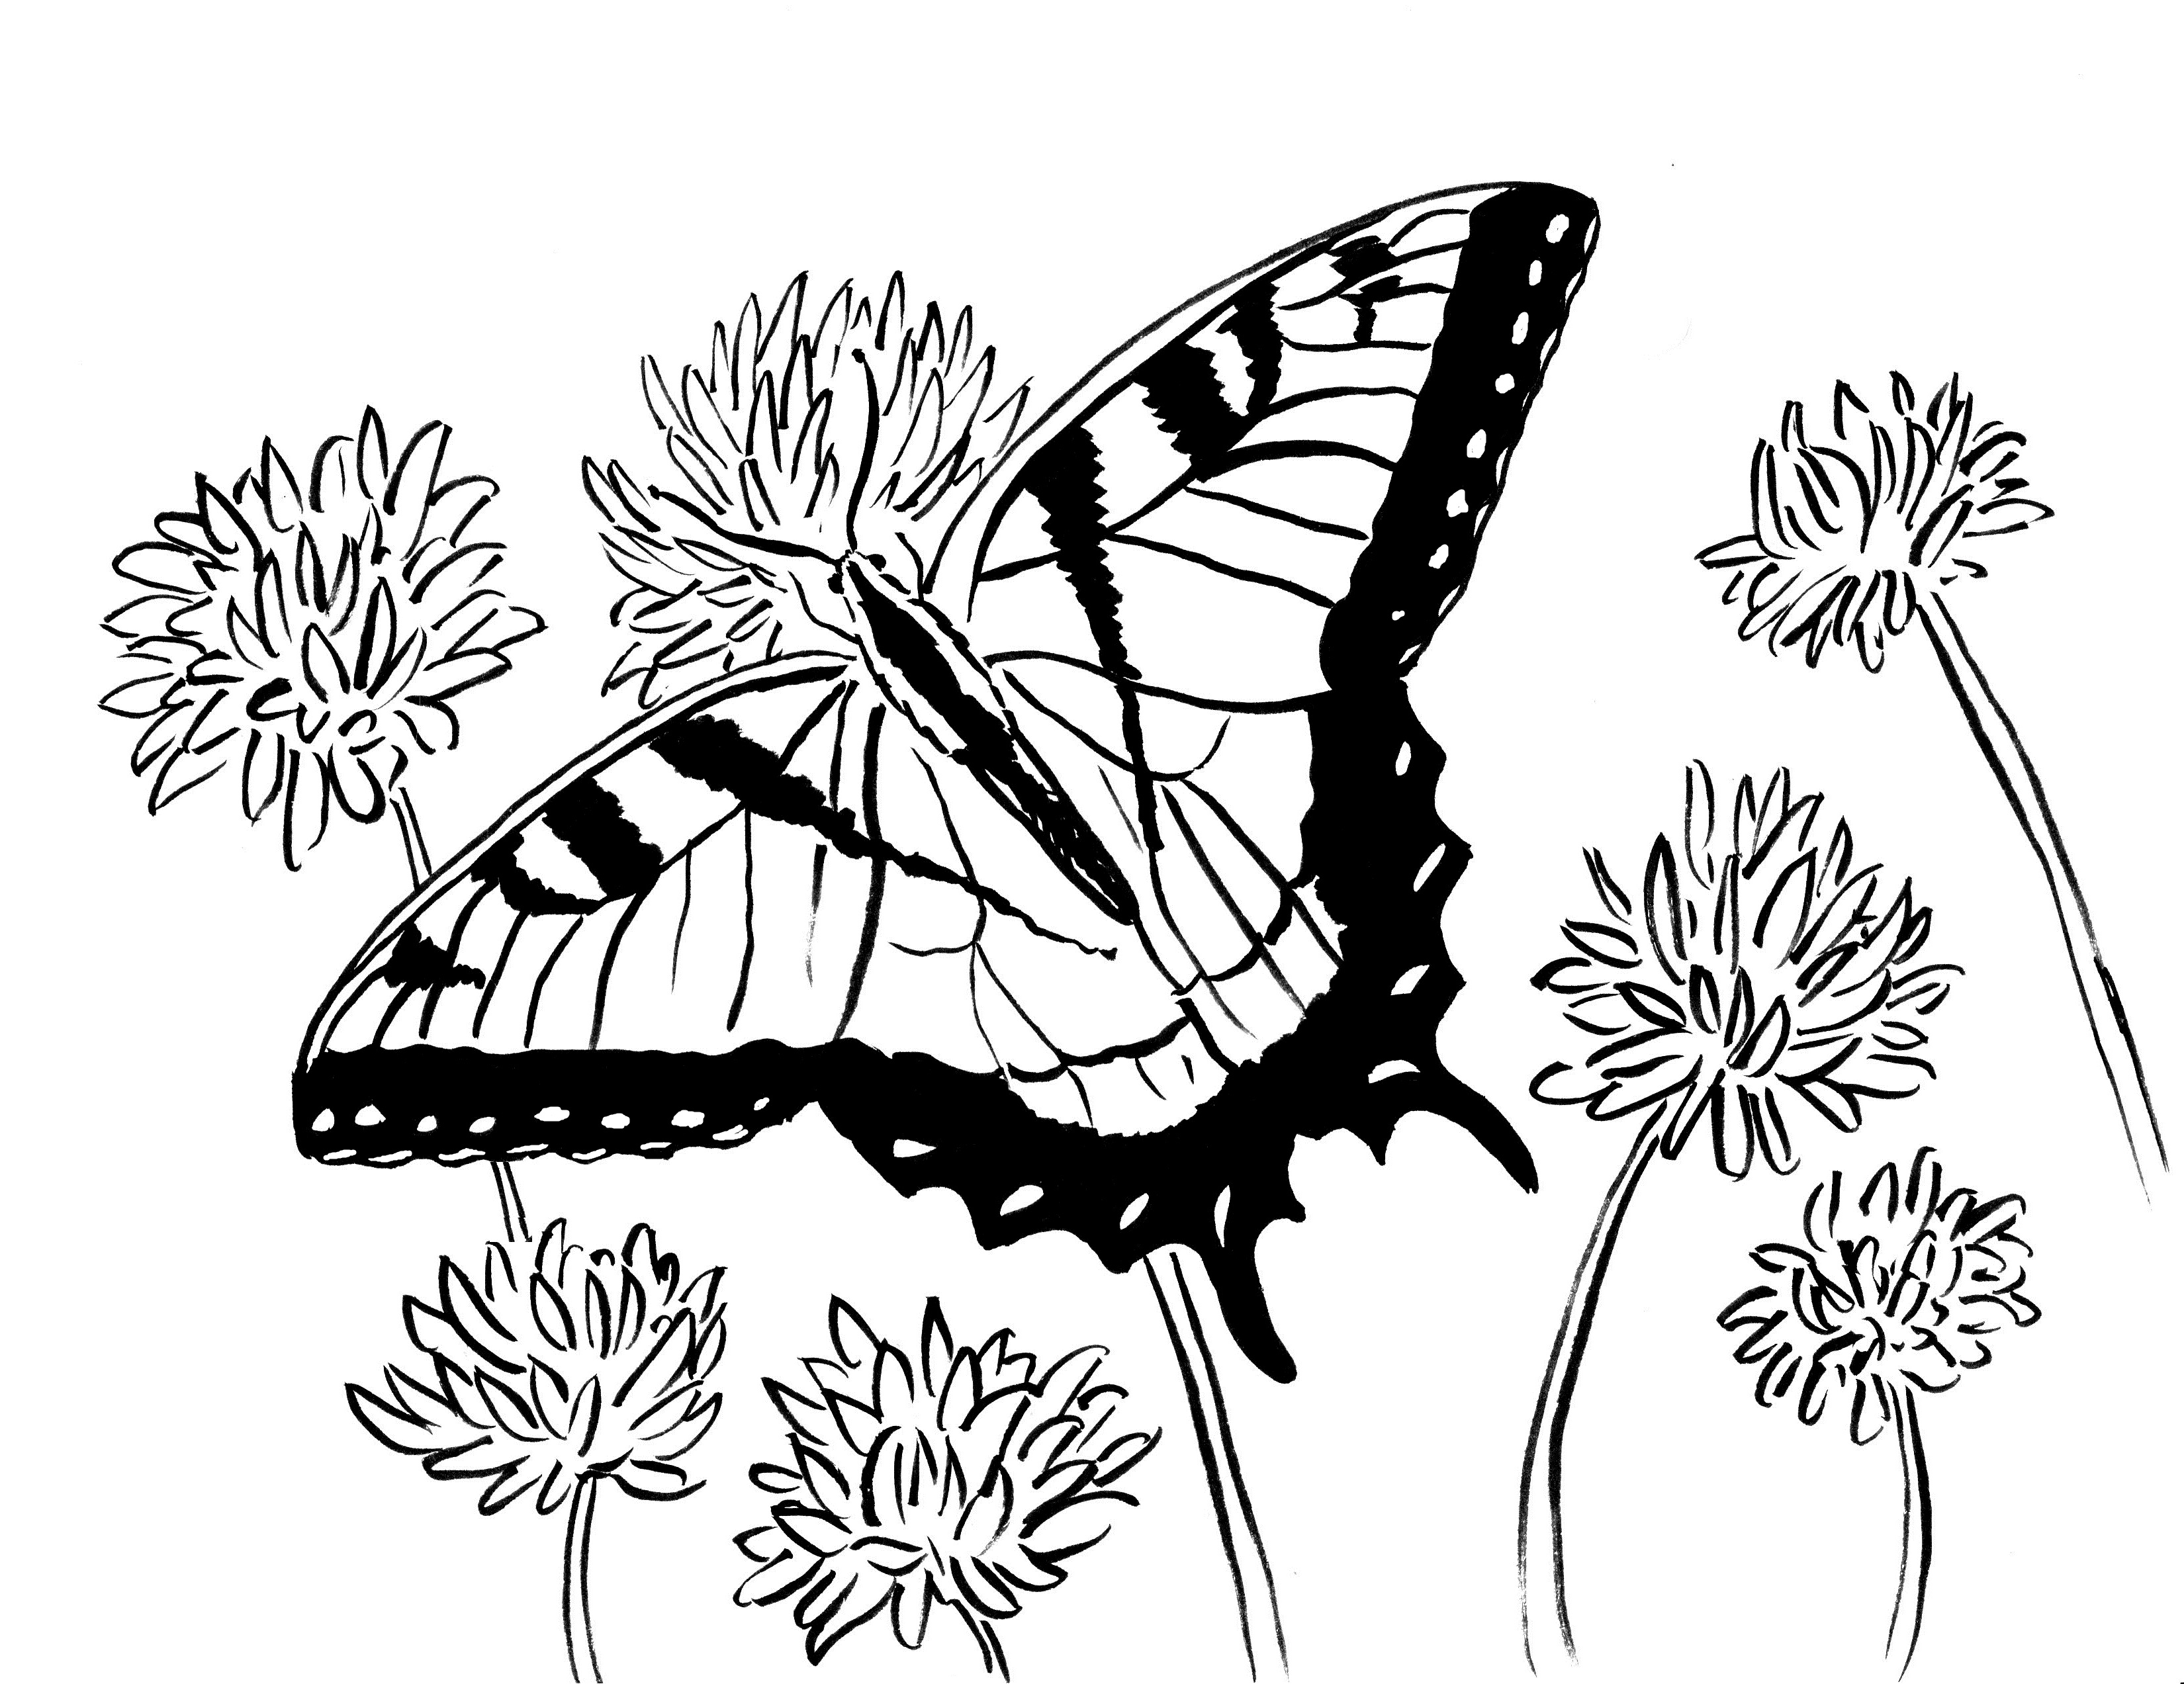 Swallowtail Butterfly Coloring Page - Art Starts